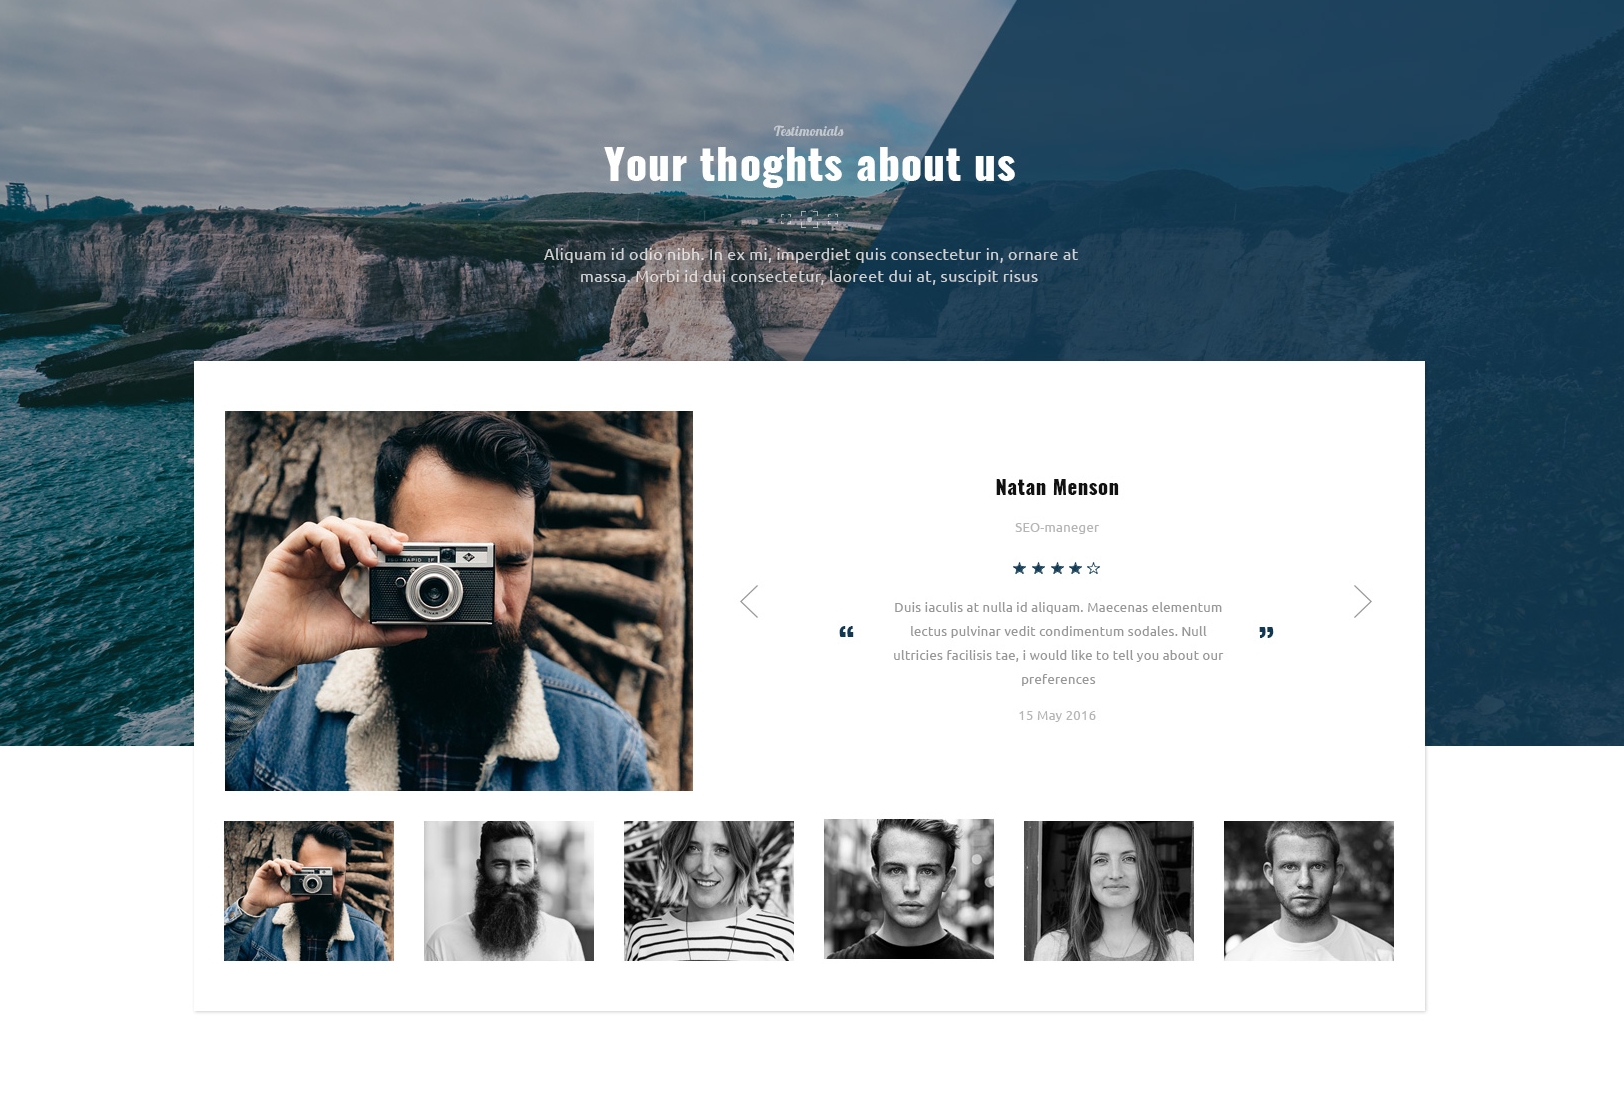 Free Bootstrap Store Theme